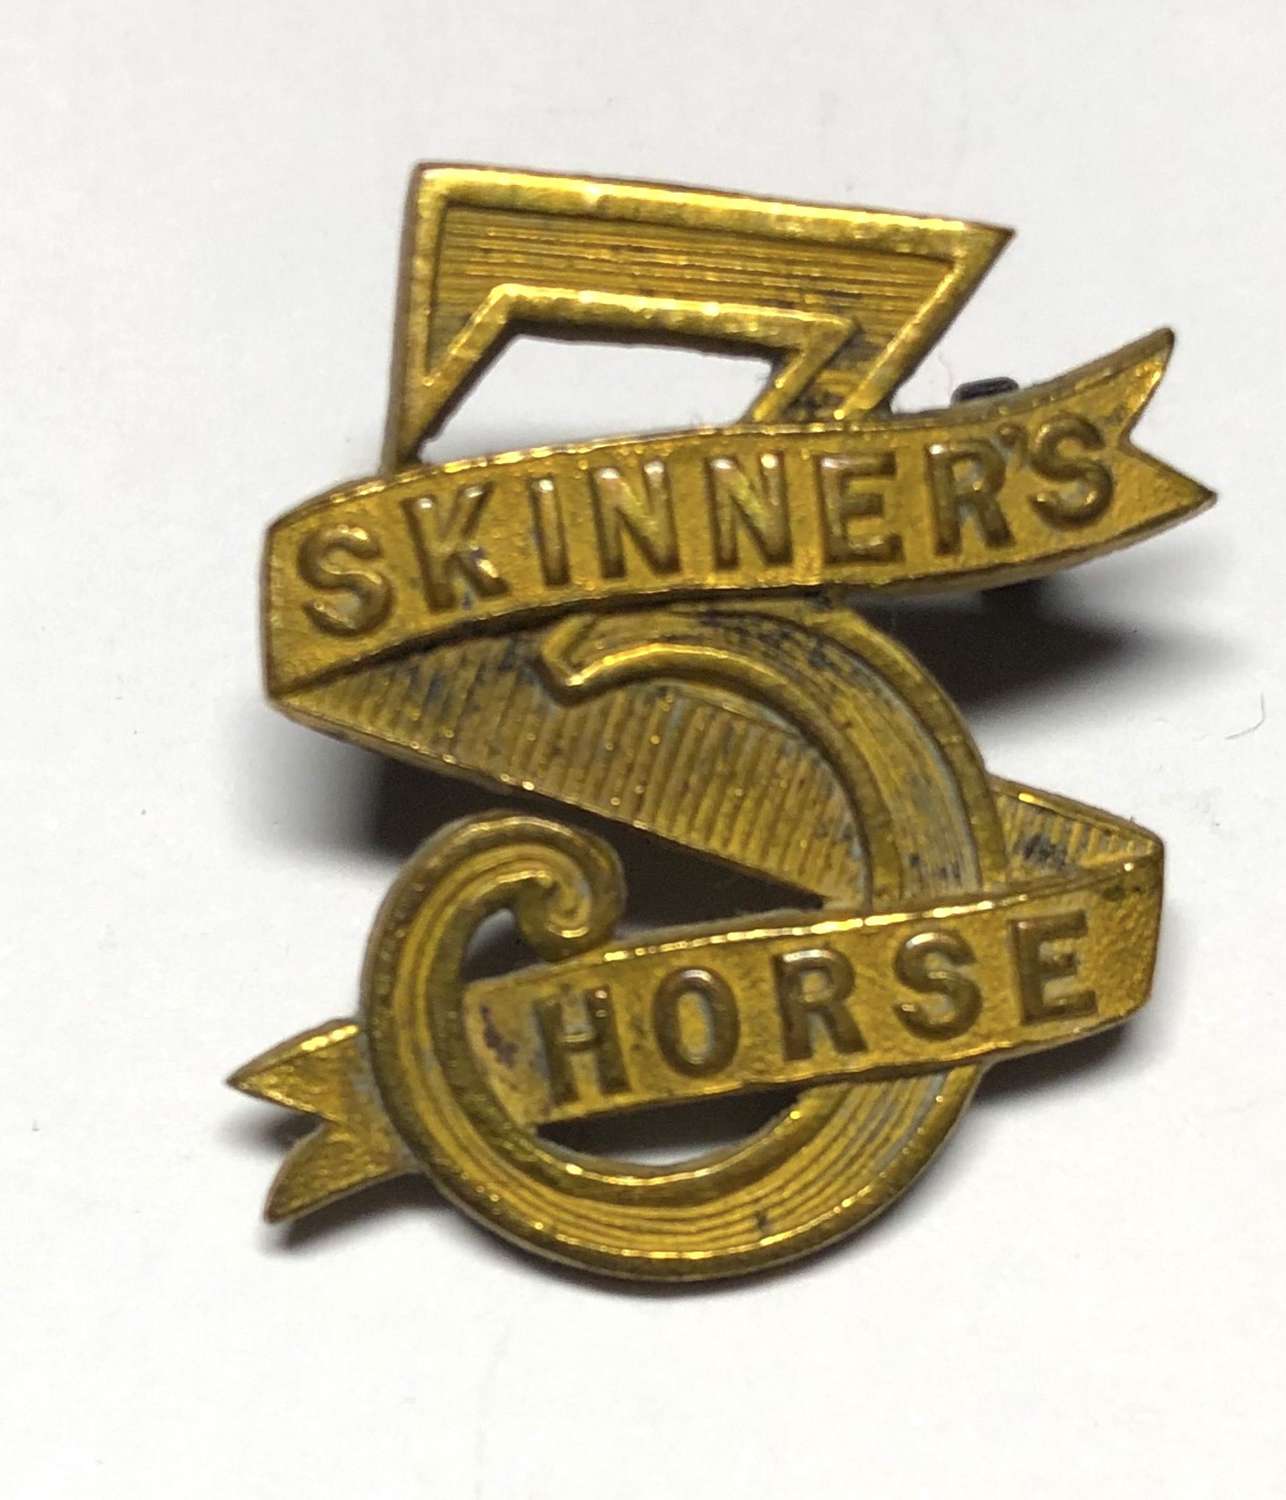 Indian Army. Skinner's Horse Officer's Field Service cap badge 1903-22